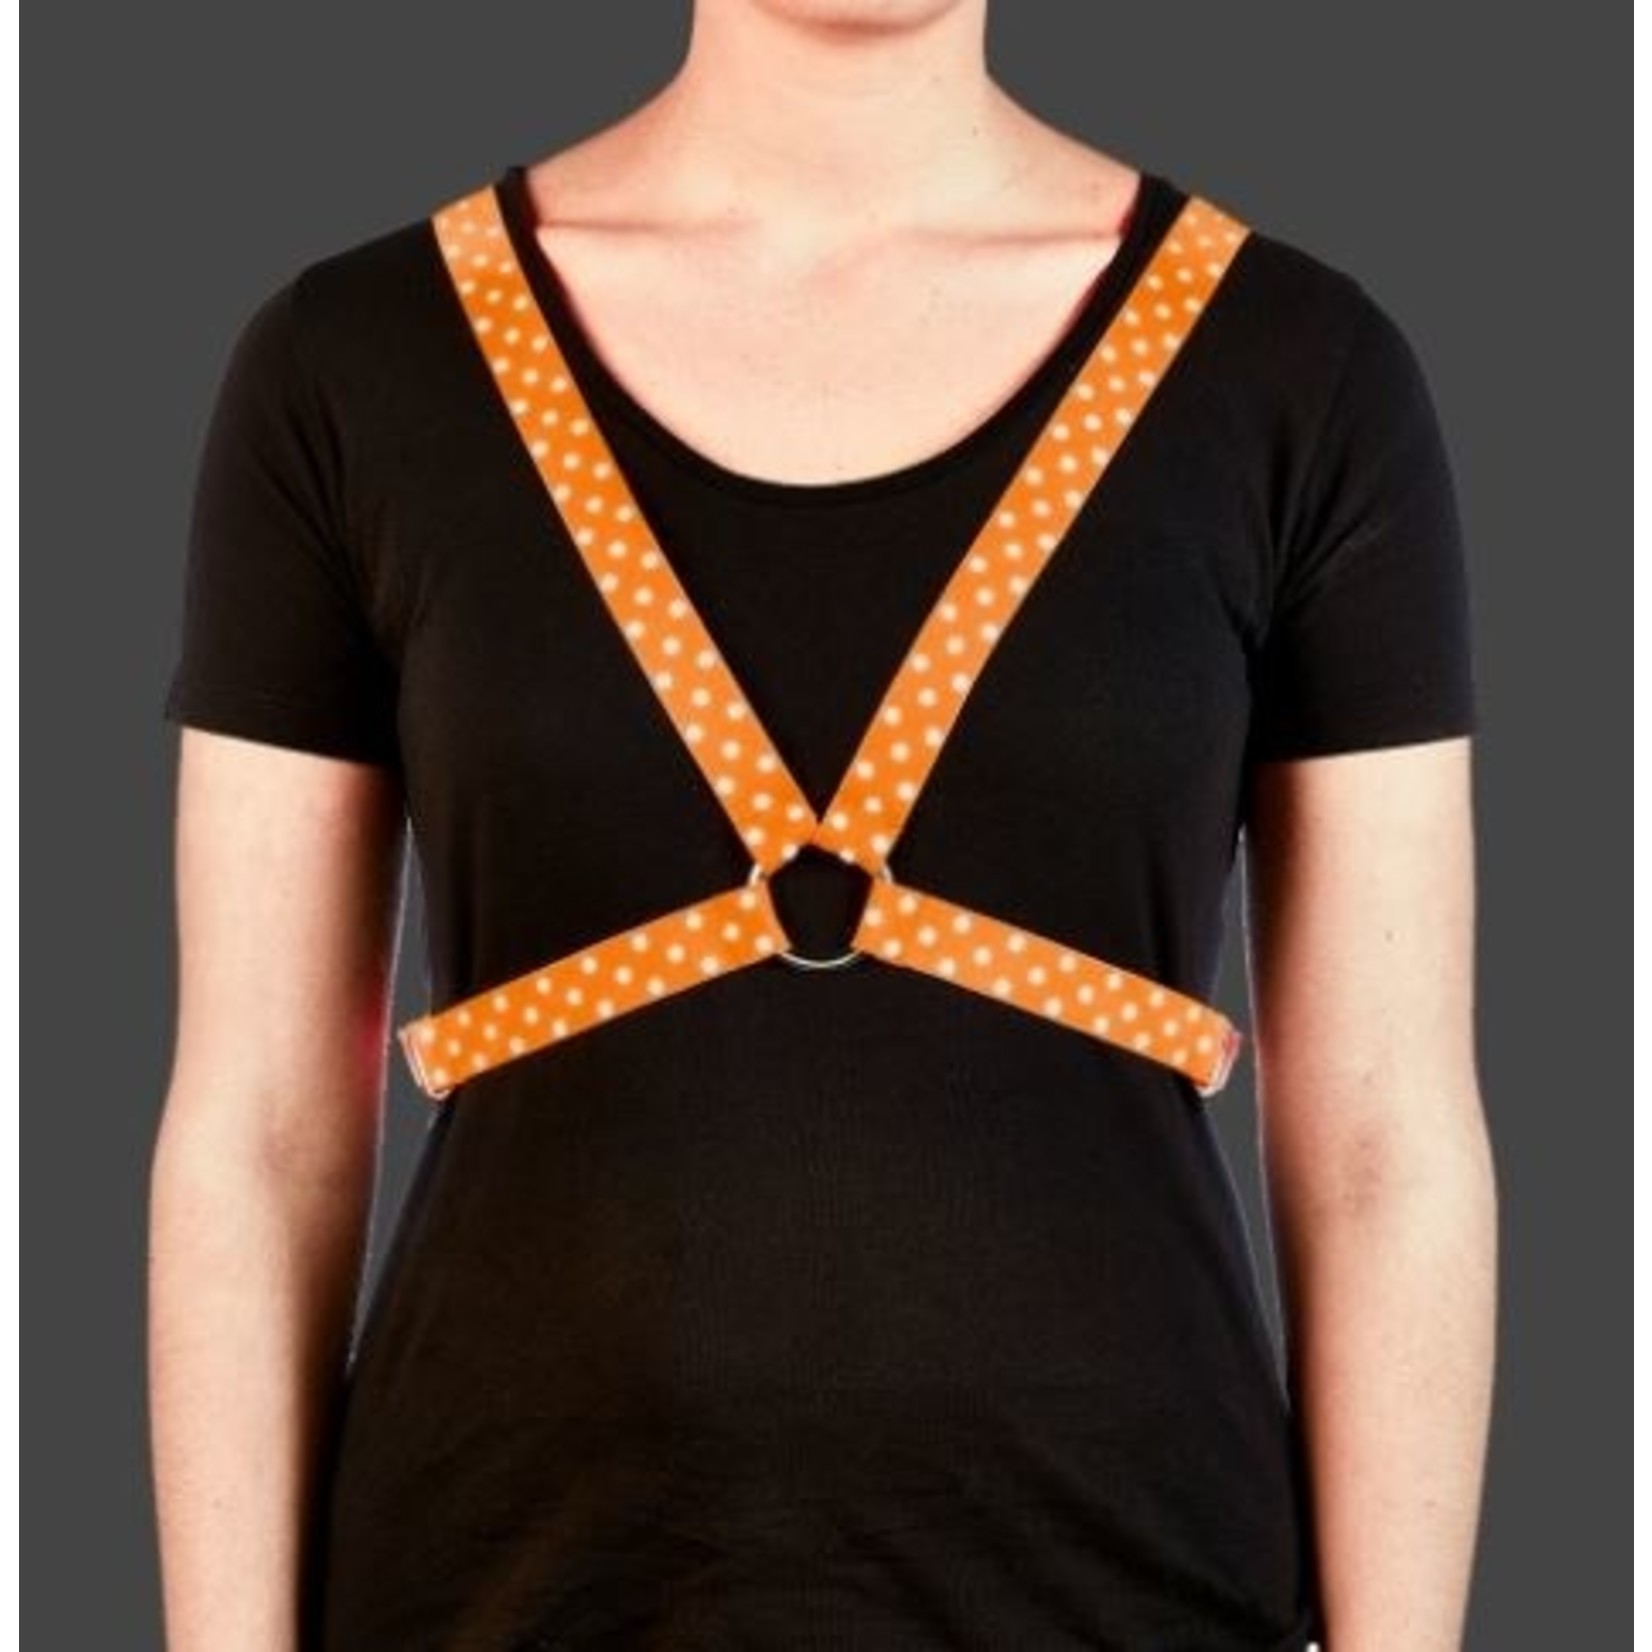 Monkey See MonkeySee Harness - Light Weight And Comfortable - Dot Tangerine